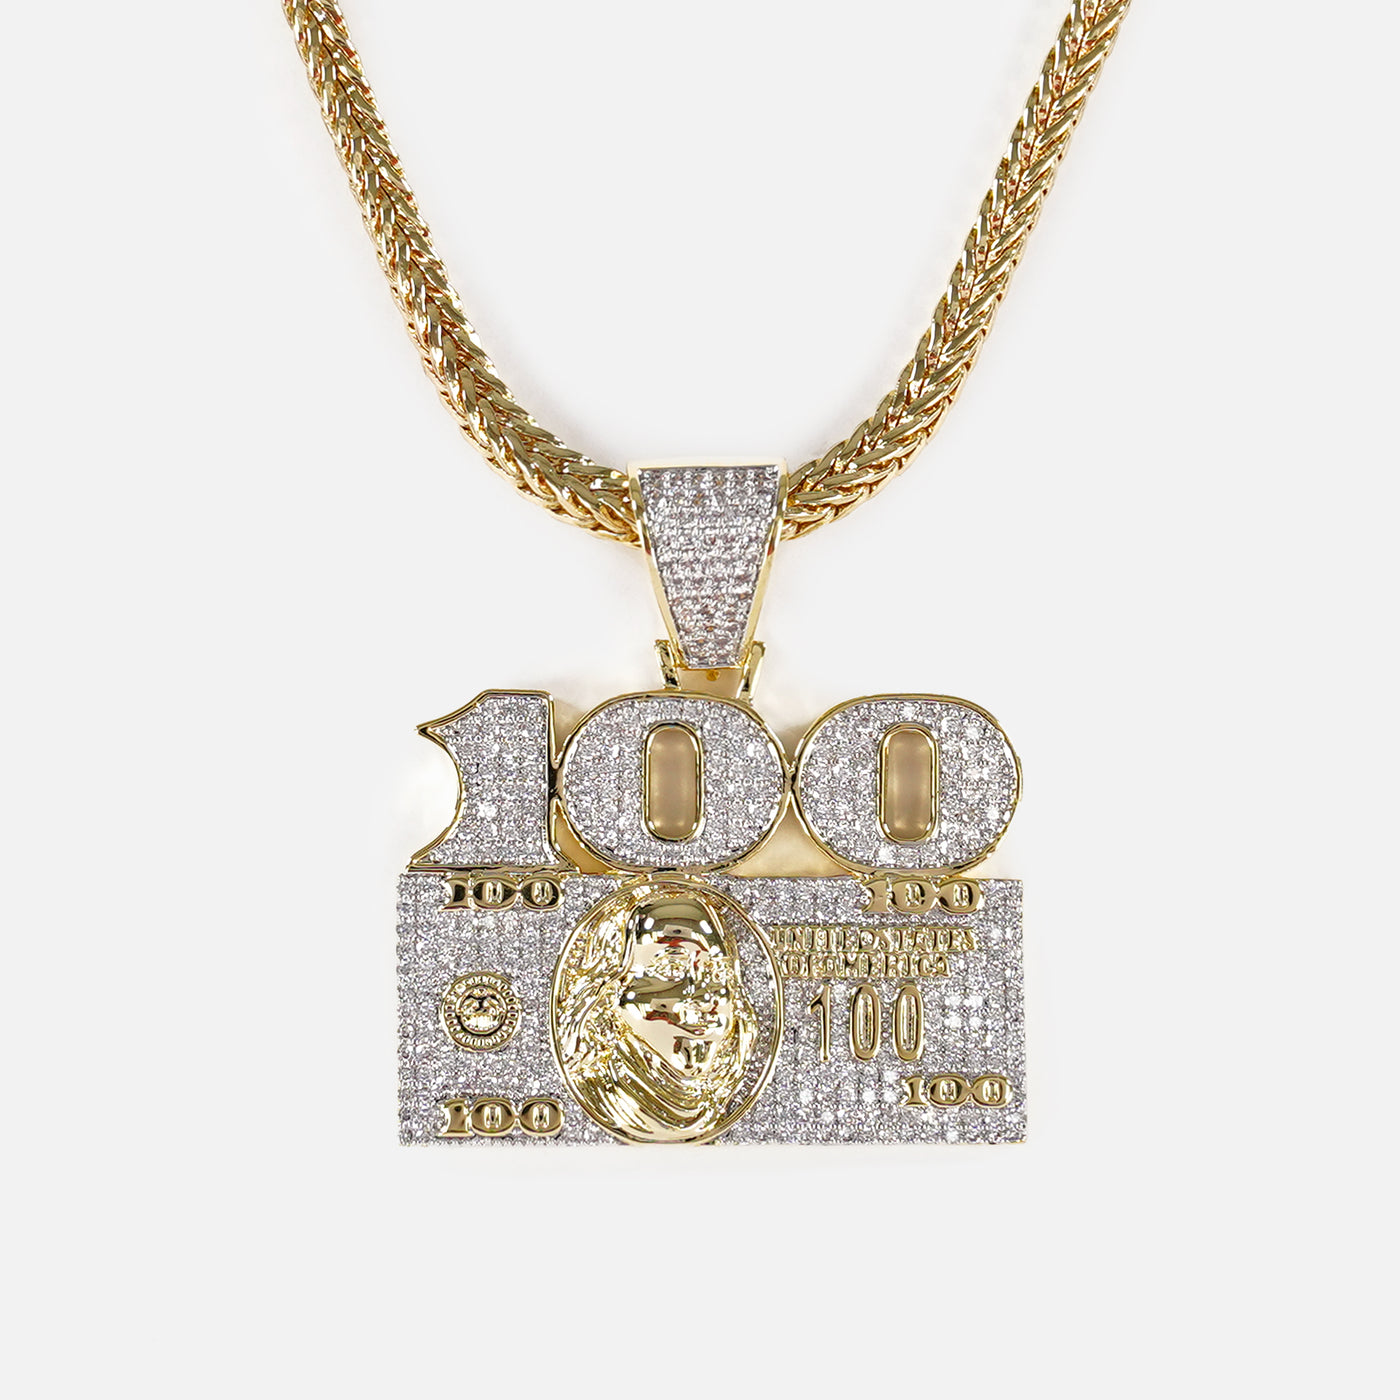 100 Money Benjamin 1½" Pendant with Chain Necklace - Gold Plated Stainless Steel